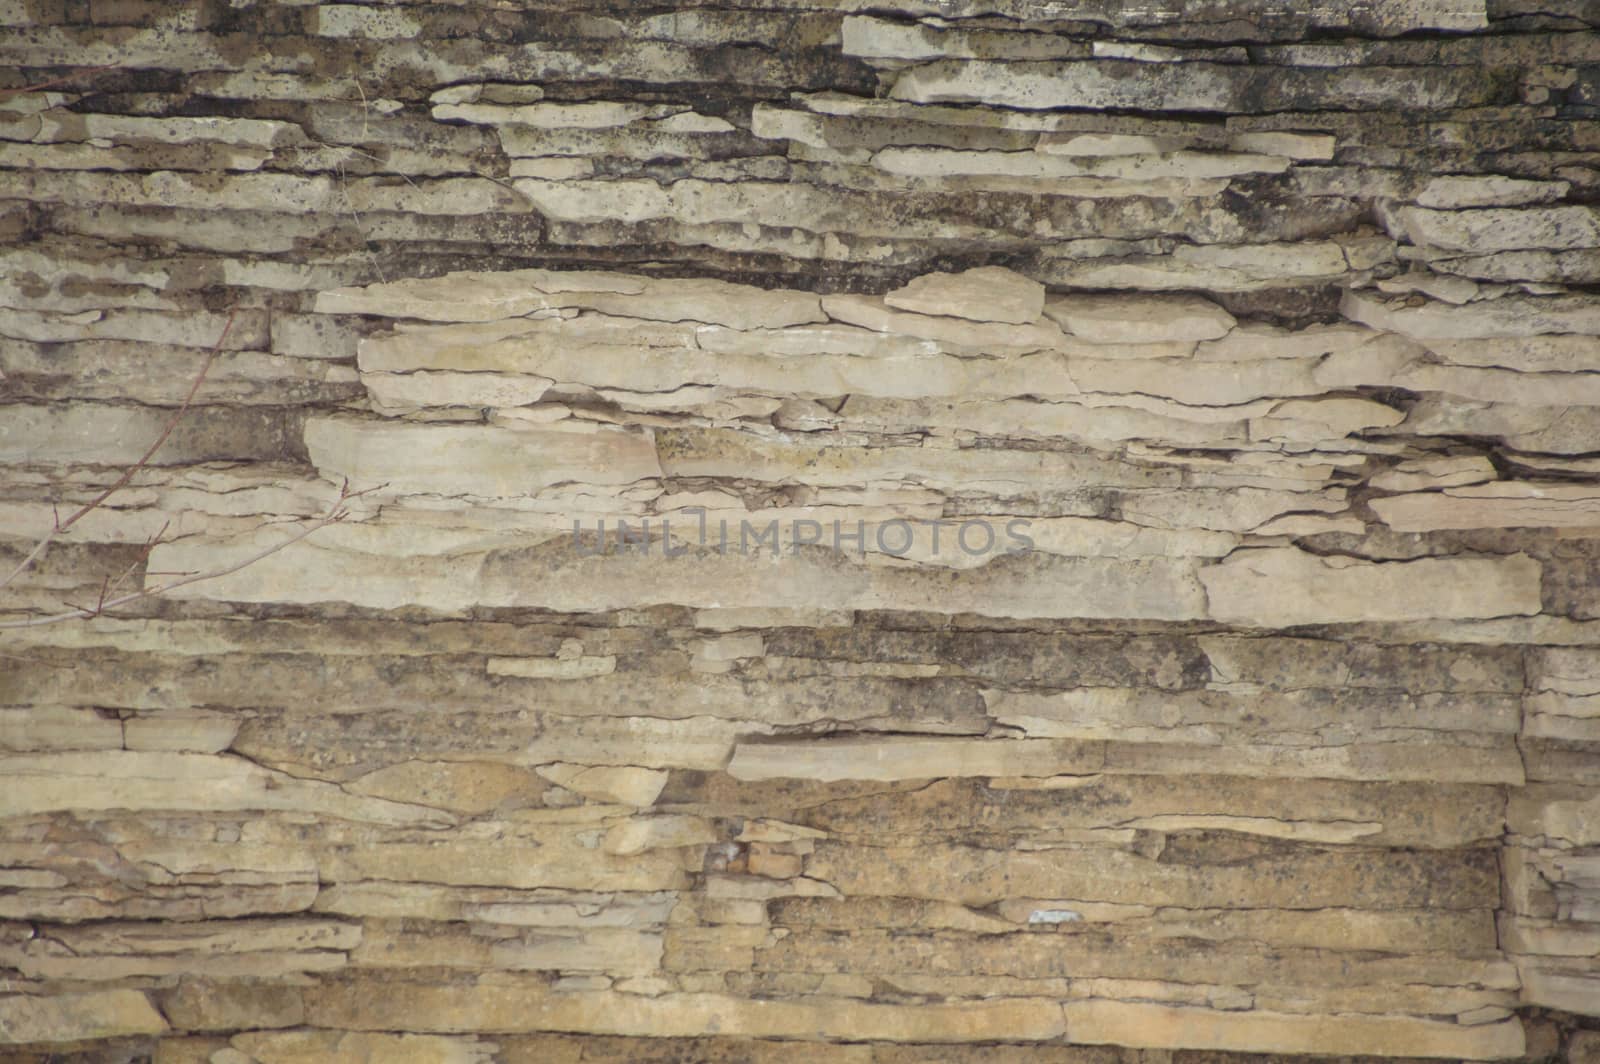 A background cliff face of weathered sedimentary limestone with cracks in it.